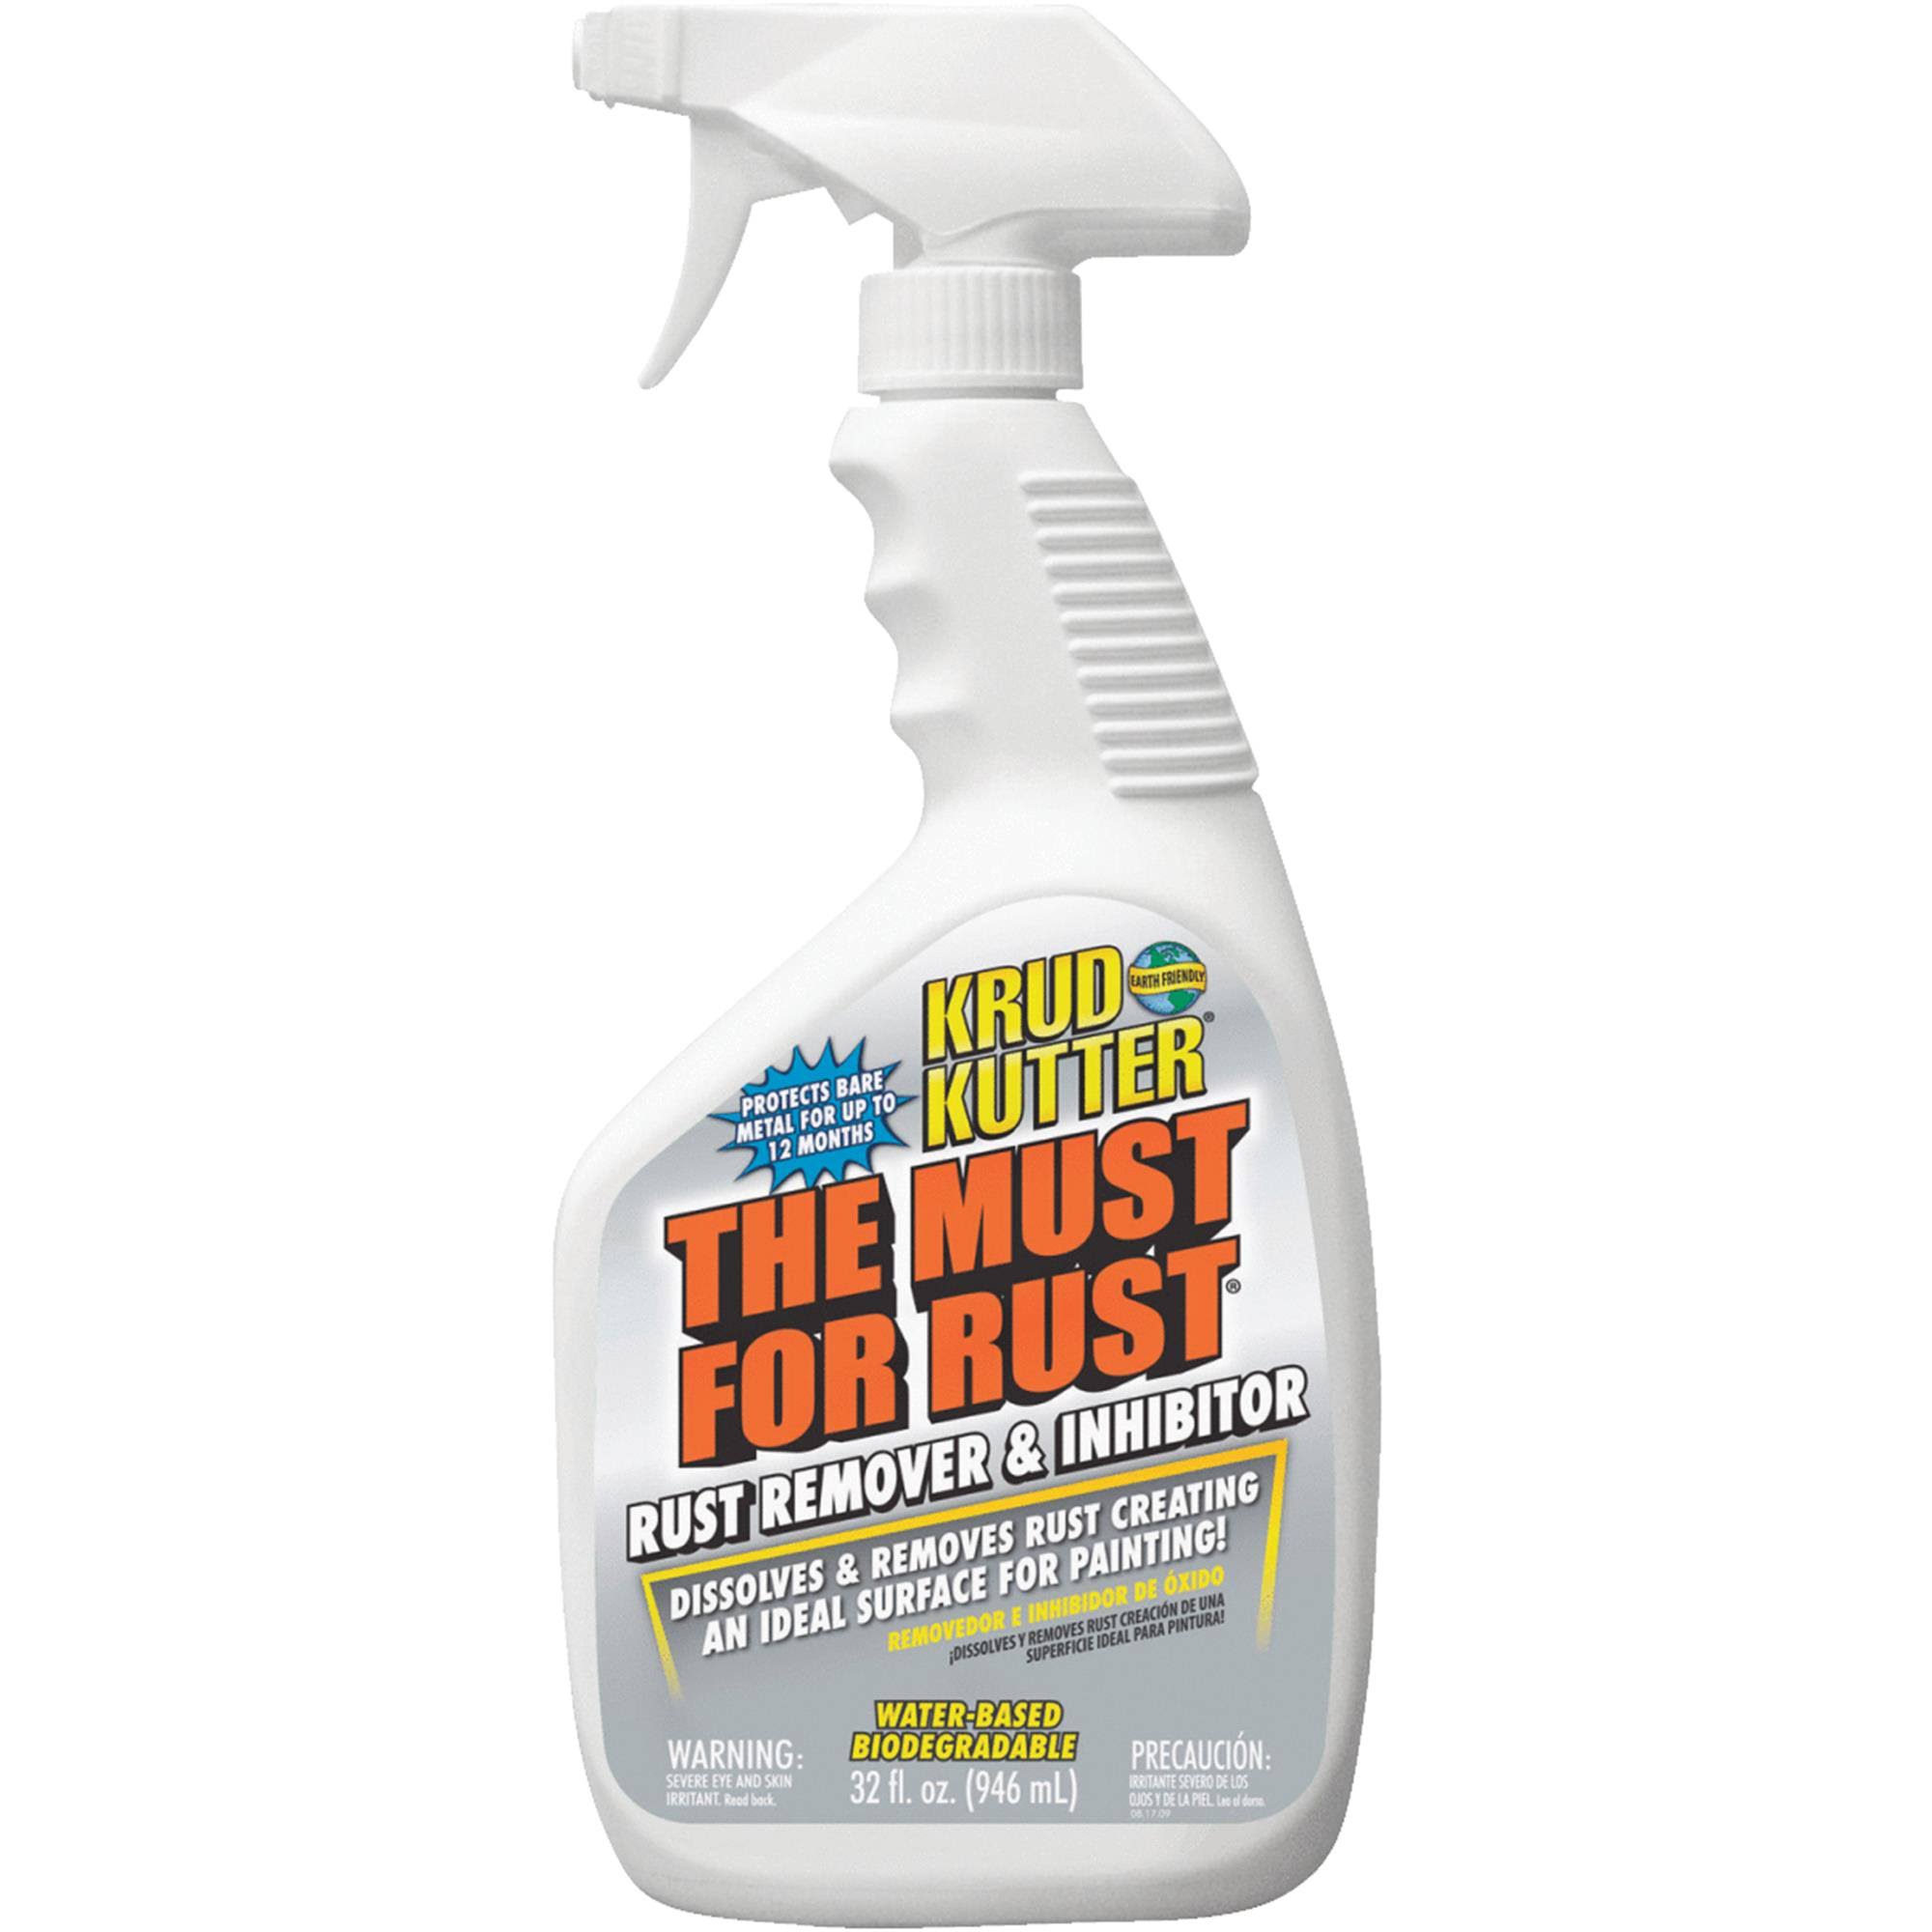 Krud Kutter The Must for Rust Rust Remover and Inhibitor